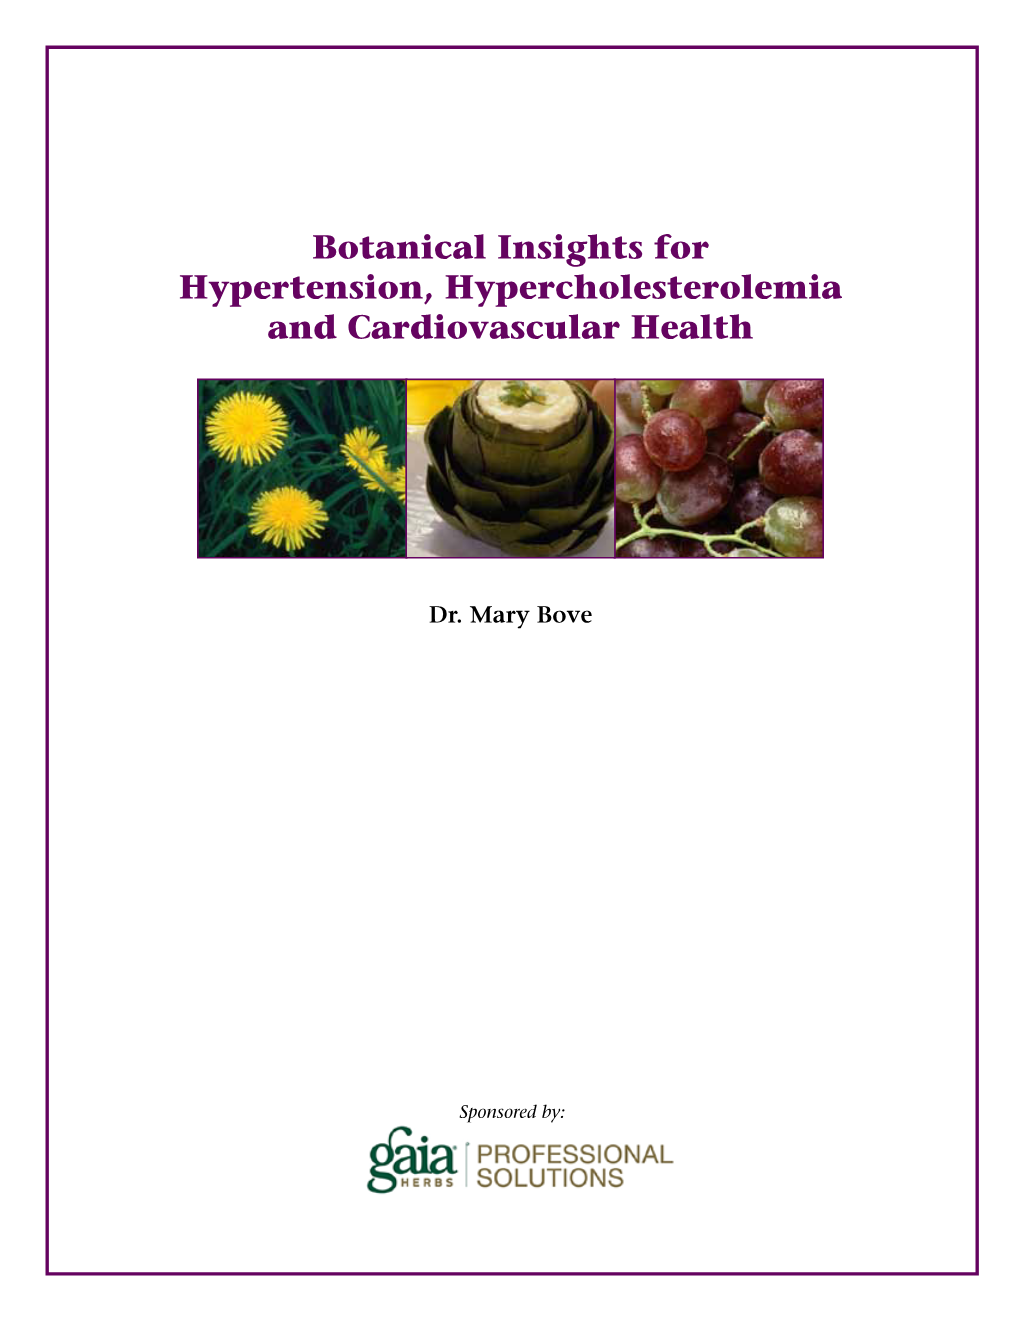 Botanical Insights for Hypertension, Hypercholesterolemia and Cardiovascular Health